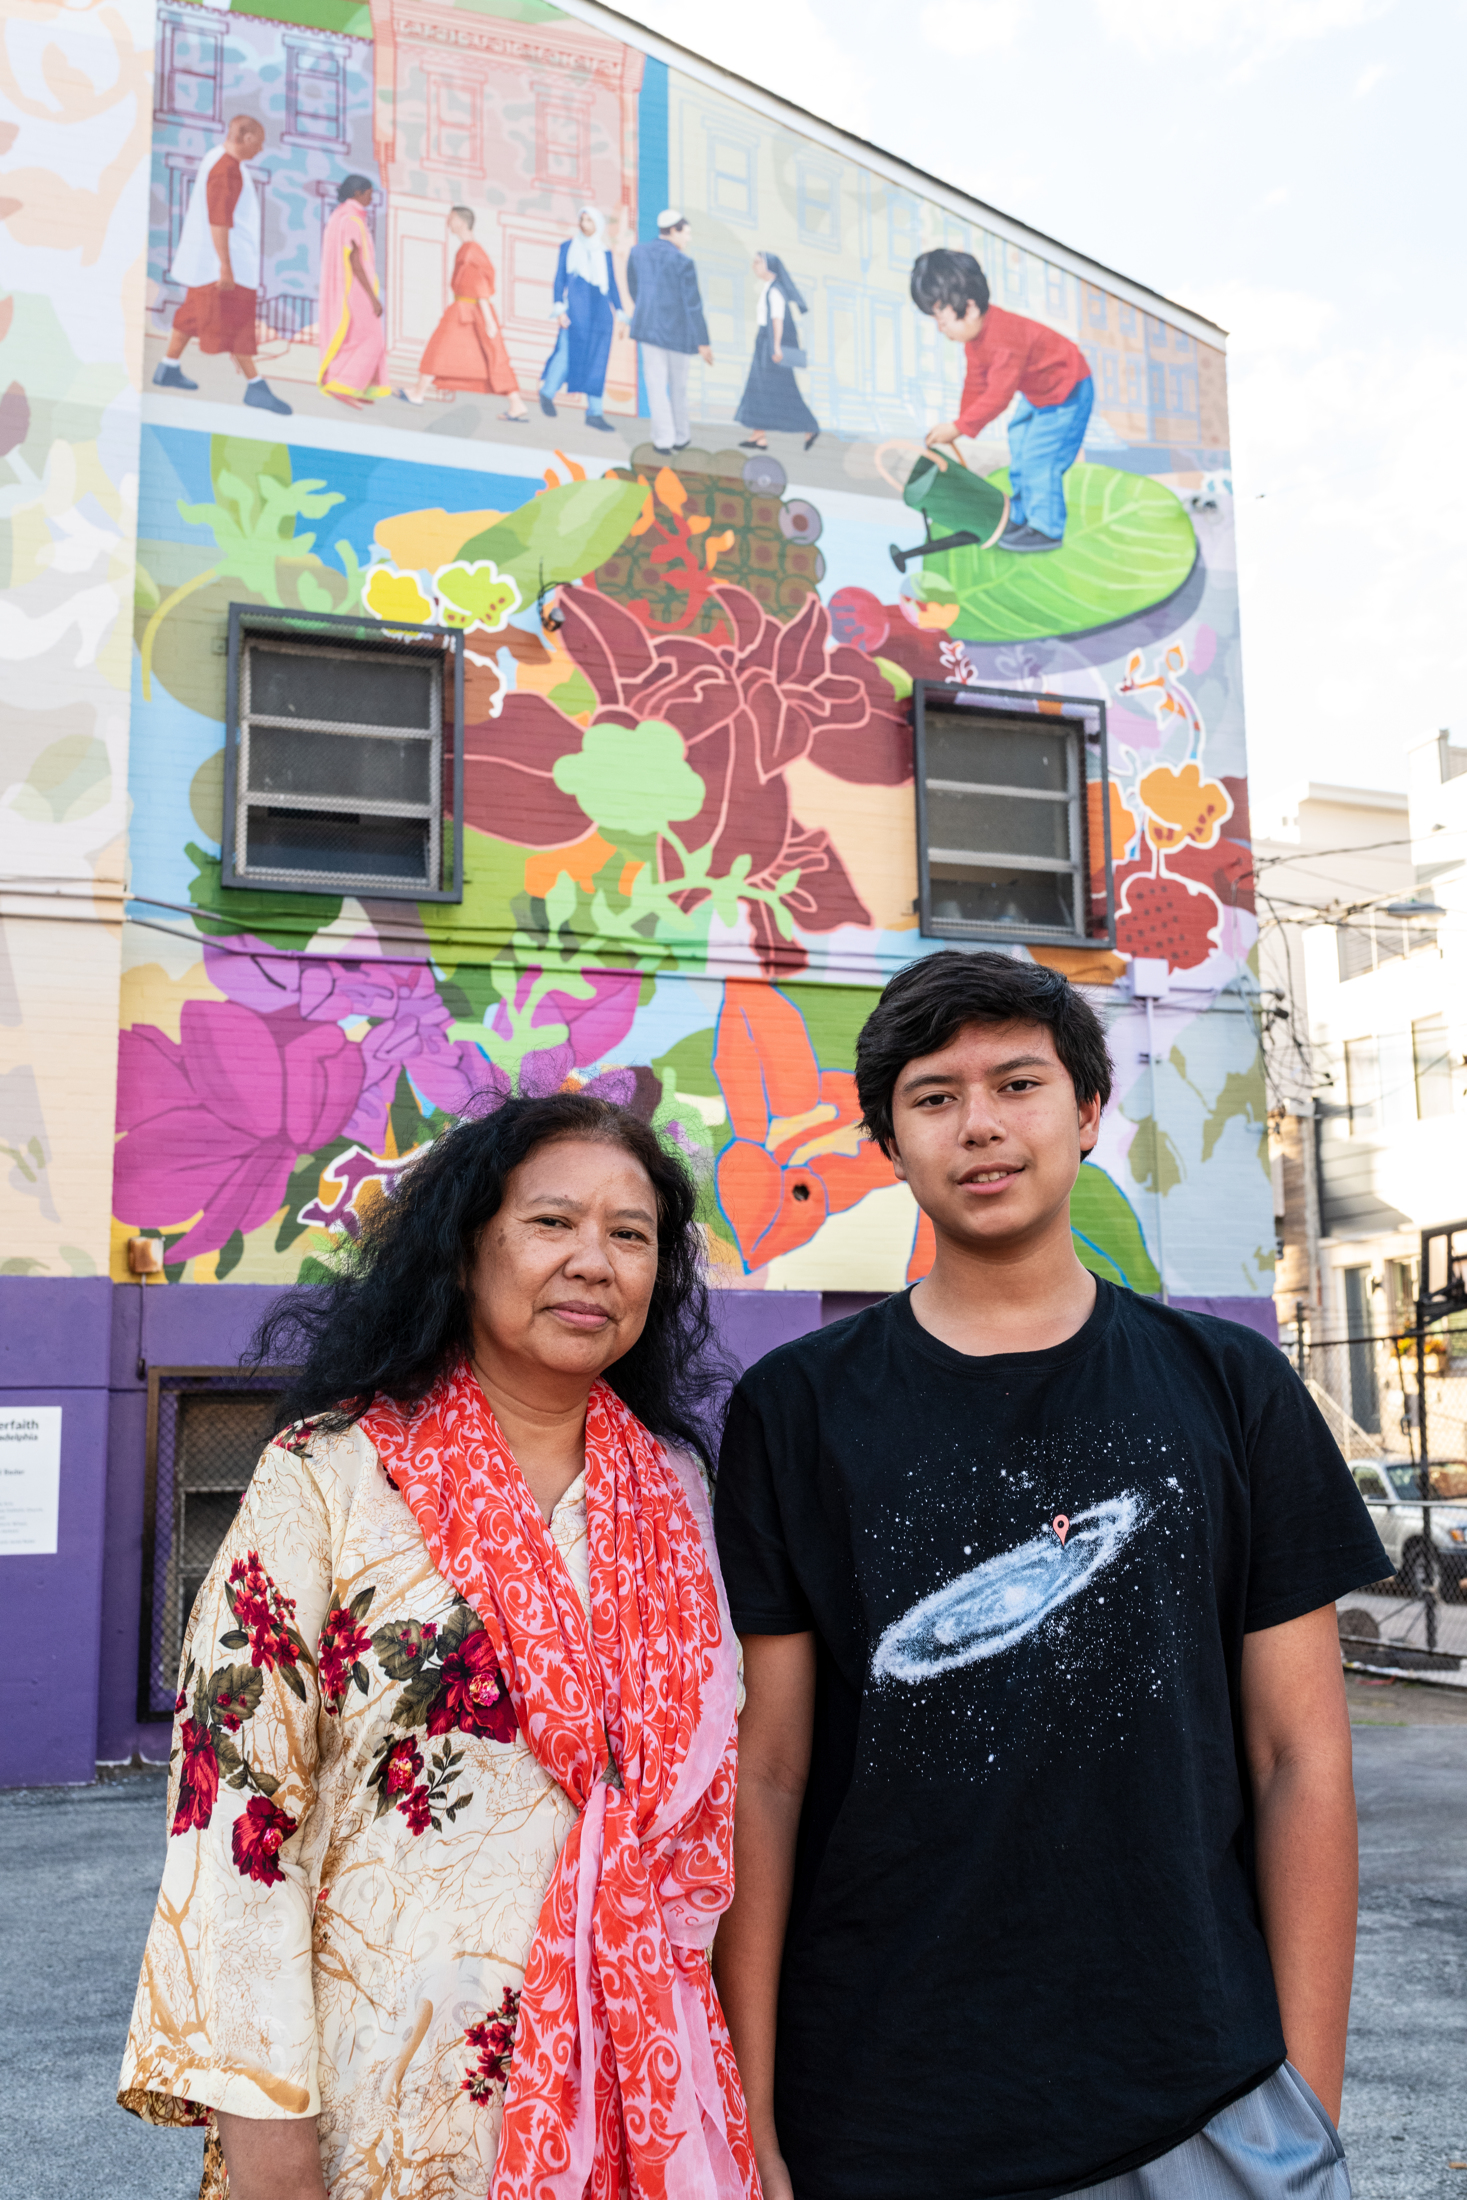 Rashidah Salam and her son pose in front of the mural